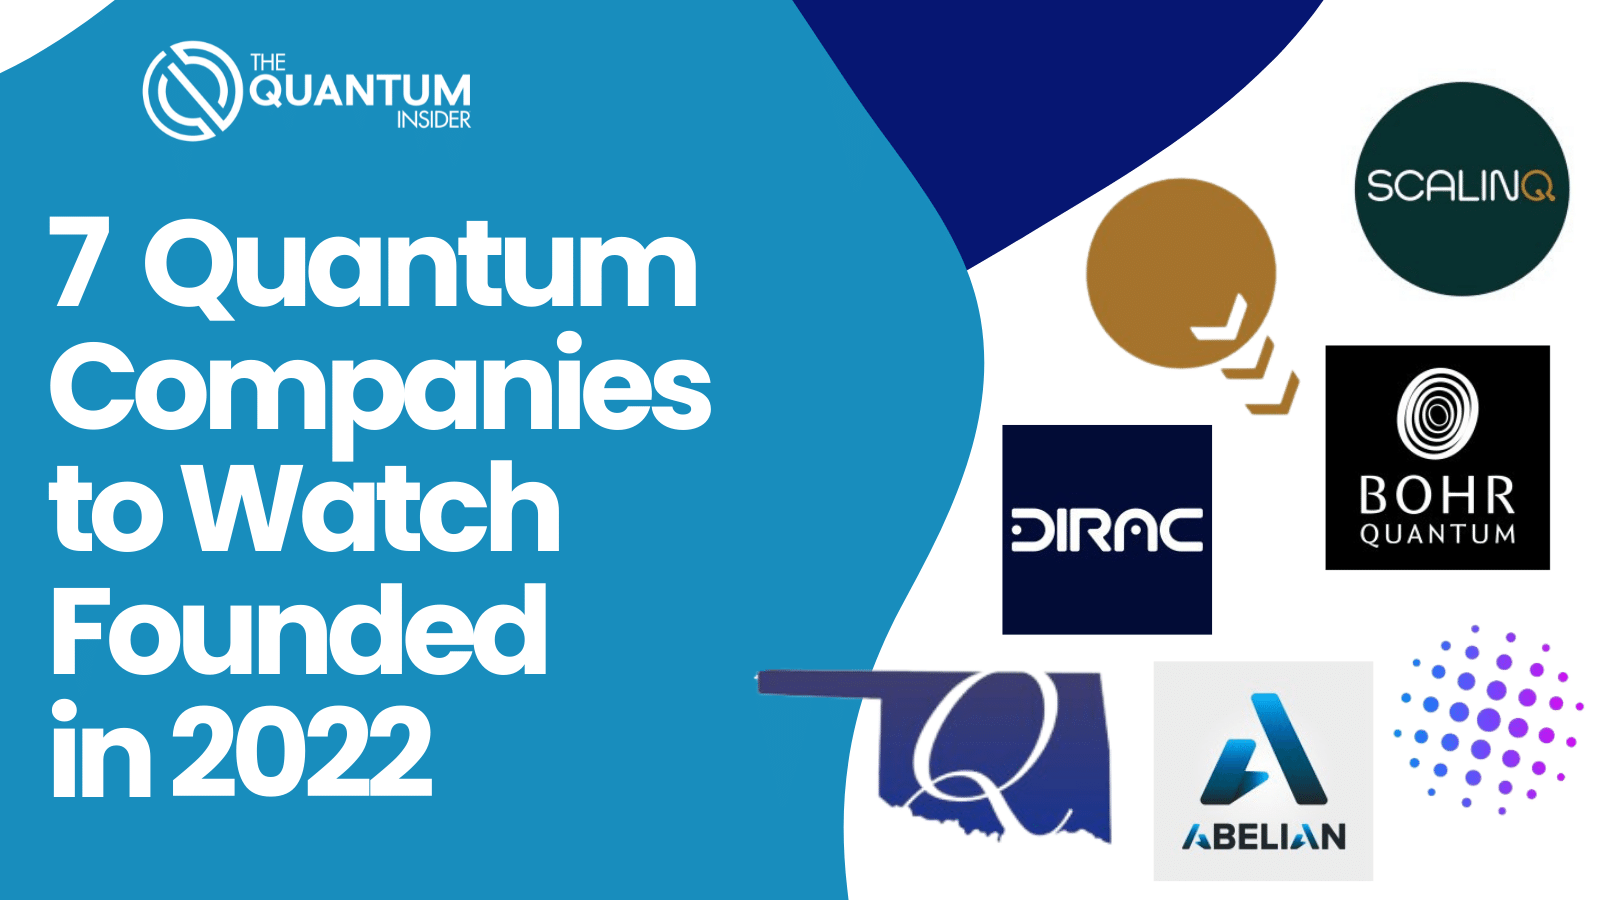 7 Quantum Companies to Watch Founded in 2024